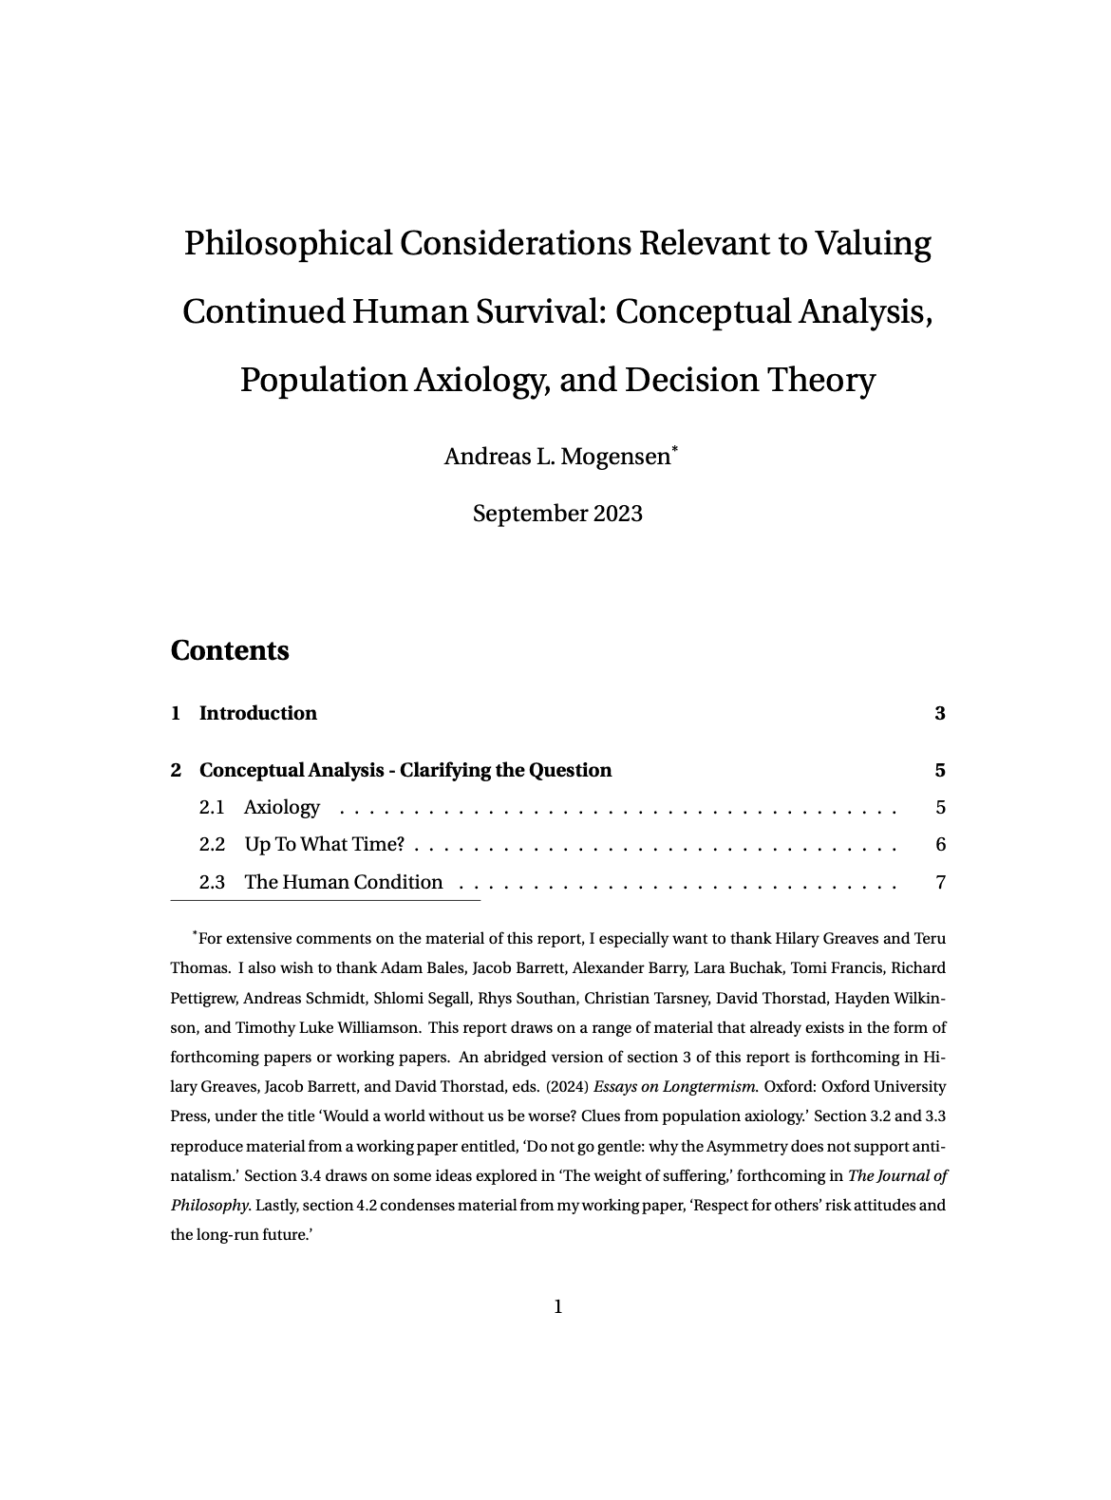 Andreas - Philosophical Considerations Relevant to Valuing Continued Human Survival Conceptual Analysis, Population Axiology, and Decision Theory cover